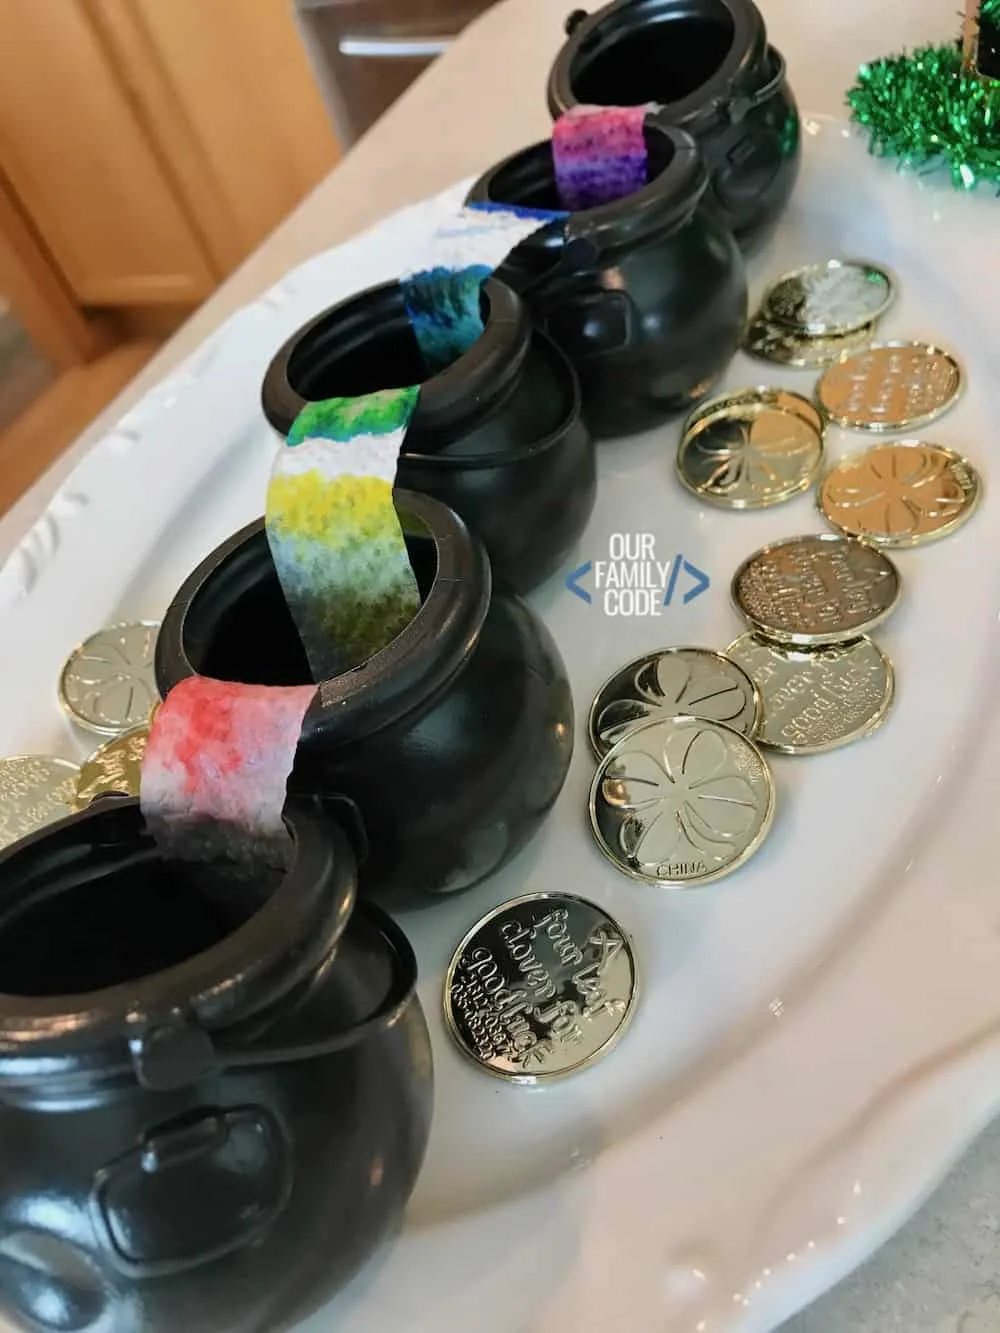 a picture of black cauldrons with rainbow colored paper towels between them with gold coins on a white plate.